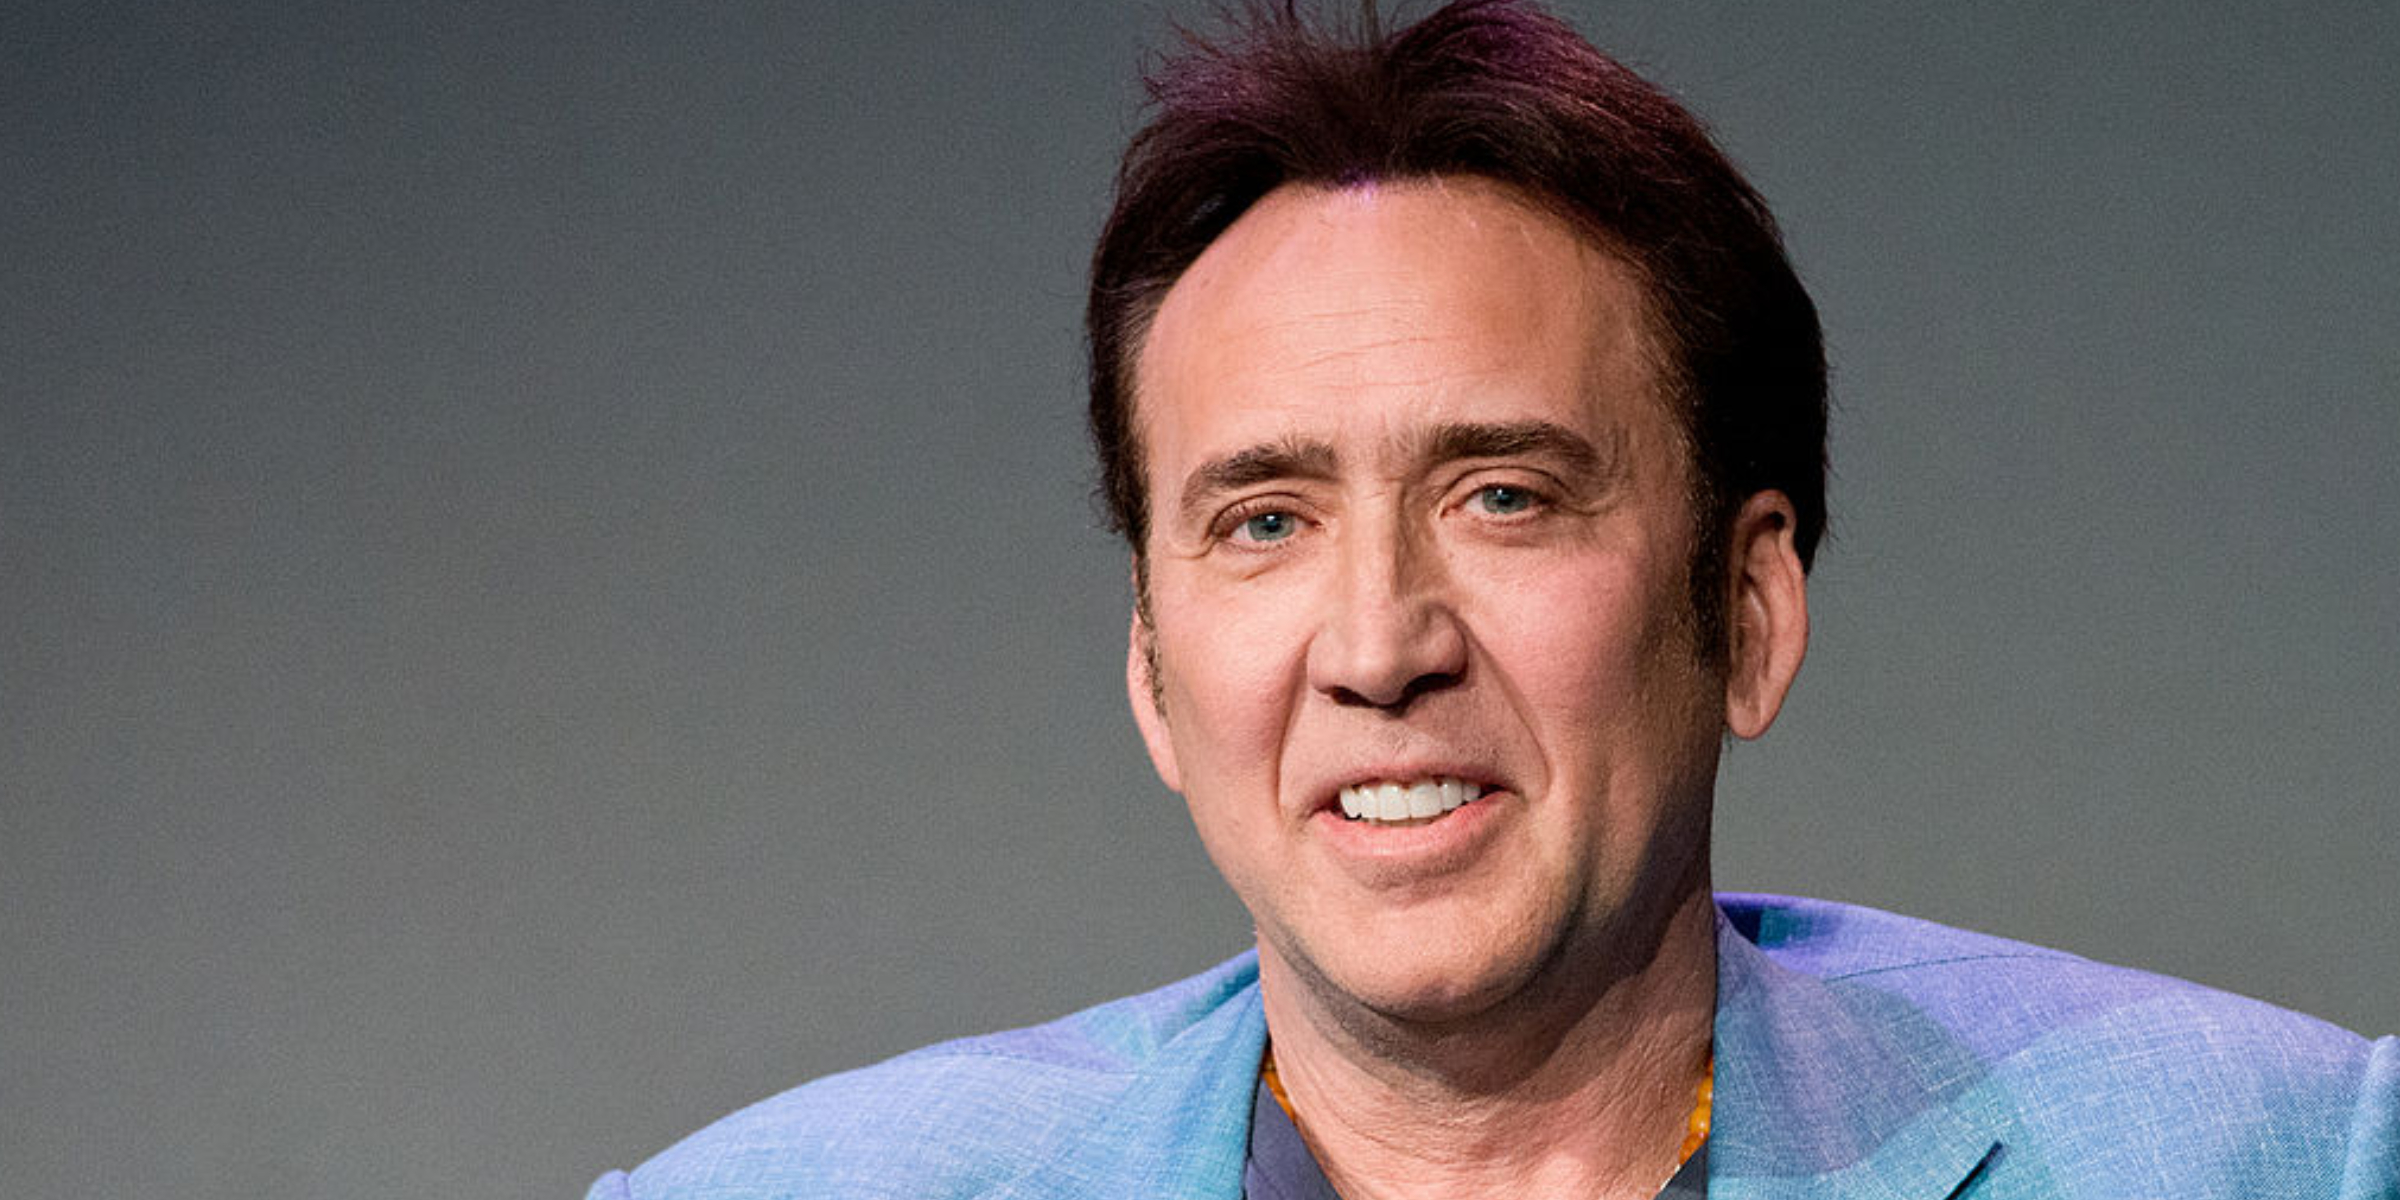 Nicolas Cage | Source: Getty Images